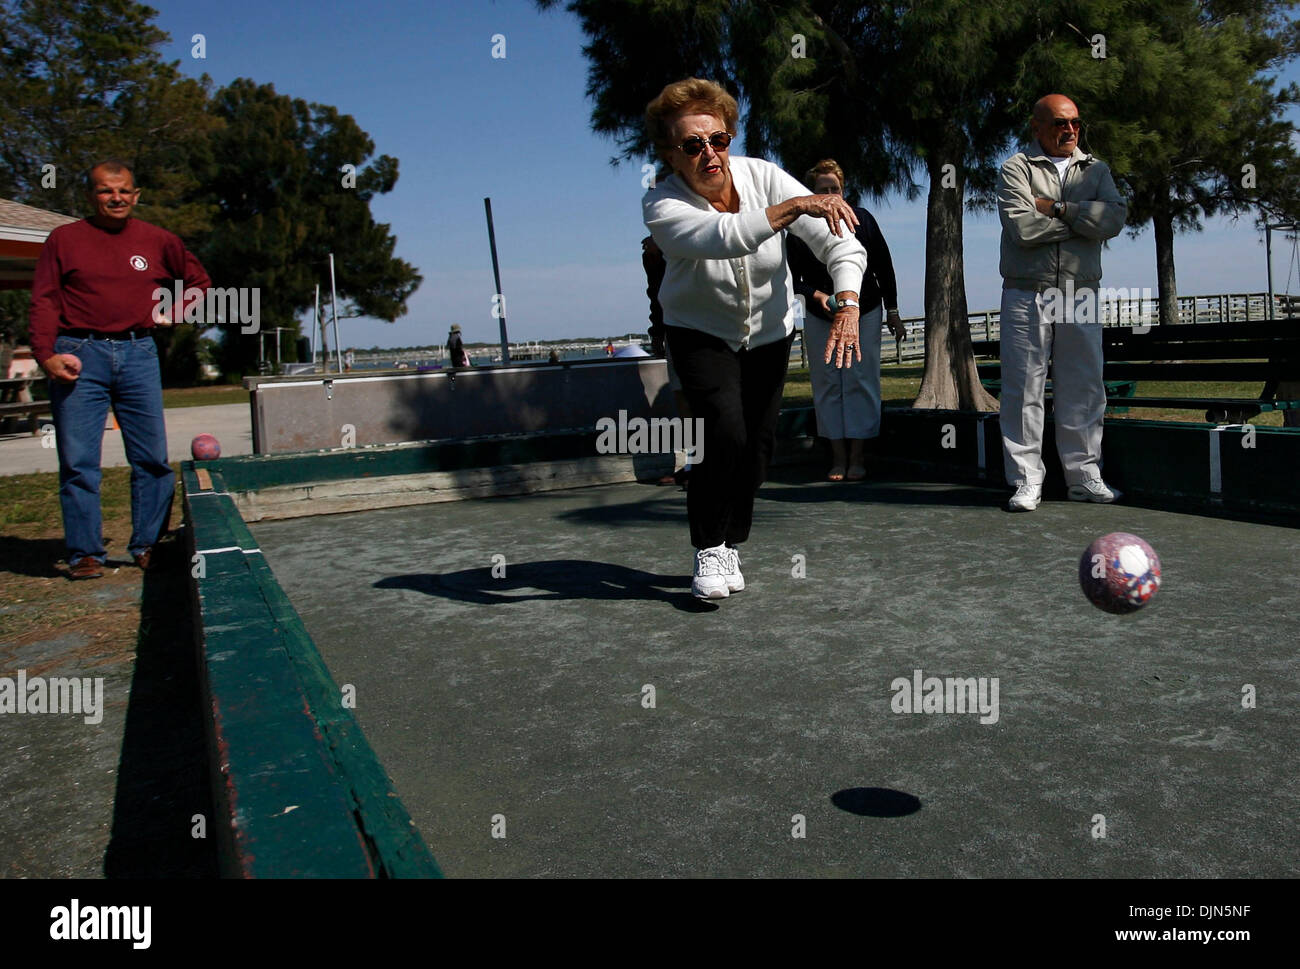 Mar 24, 2008 - St. Petersburg, Florida, USA - (Left to Right) Alberto Burk watches as a determined and competitive Virginia Cordano bowls as her husband and teammate Dr. Angel Cordano stands on the bocce ball courts at Gulfport Municipal Beach. The game was played with two three person teams which were composed of two veterans players per team and a husband and wife couple that are Stock Photo